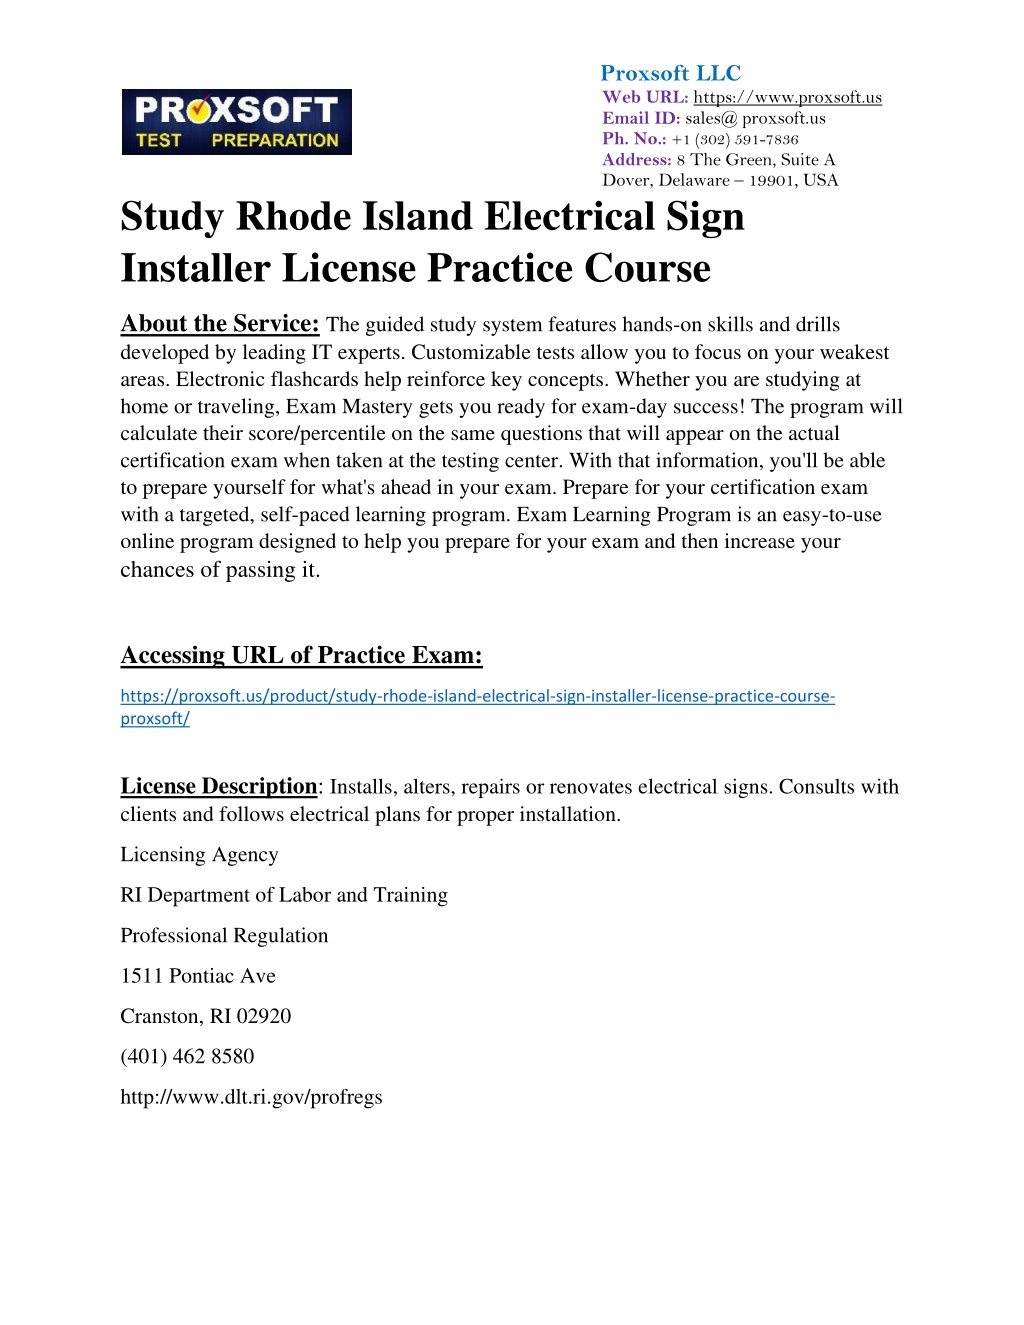 Rhode Island residential appliance installer license prep class for iphone download